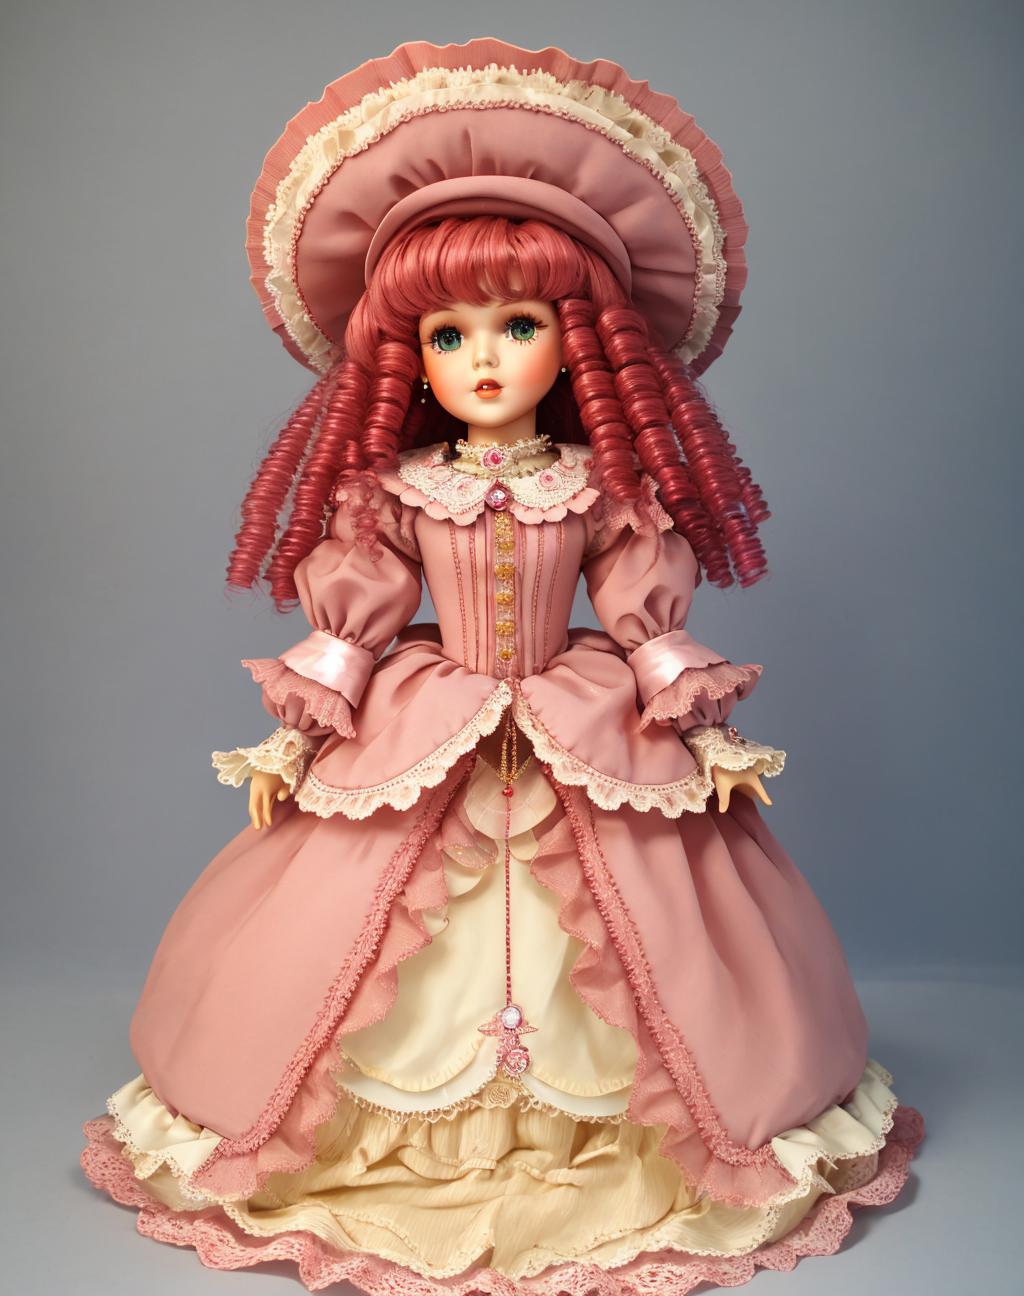 Bisque Dolls - by EDG image by EDG